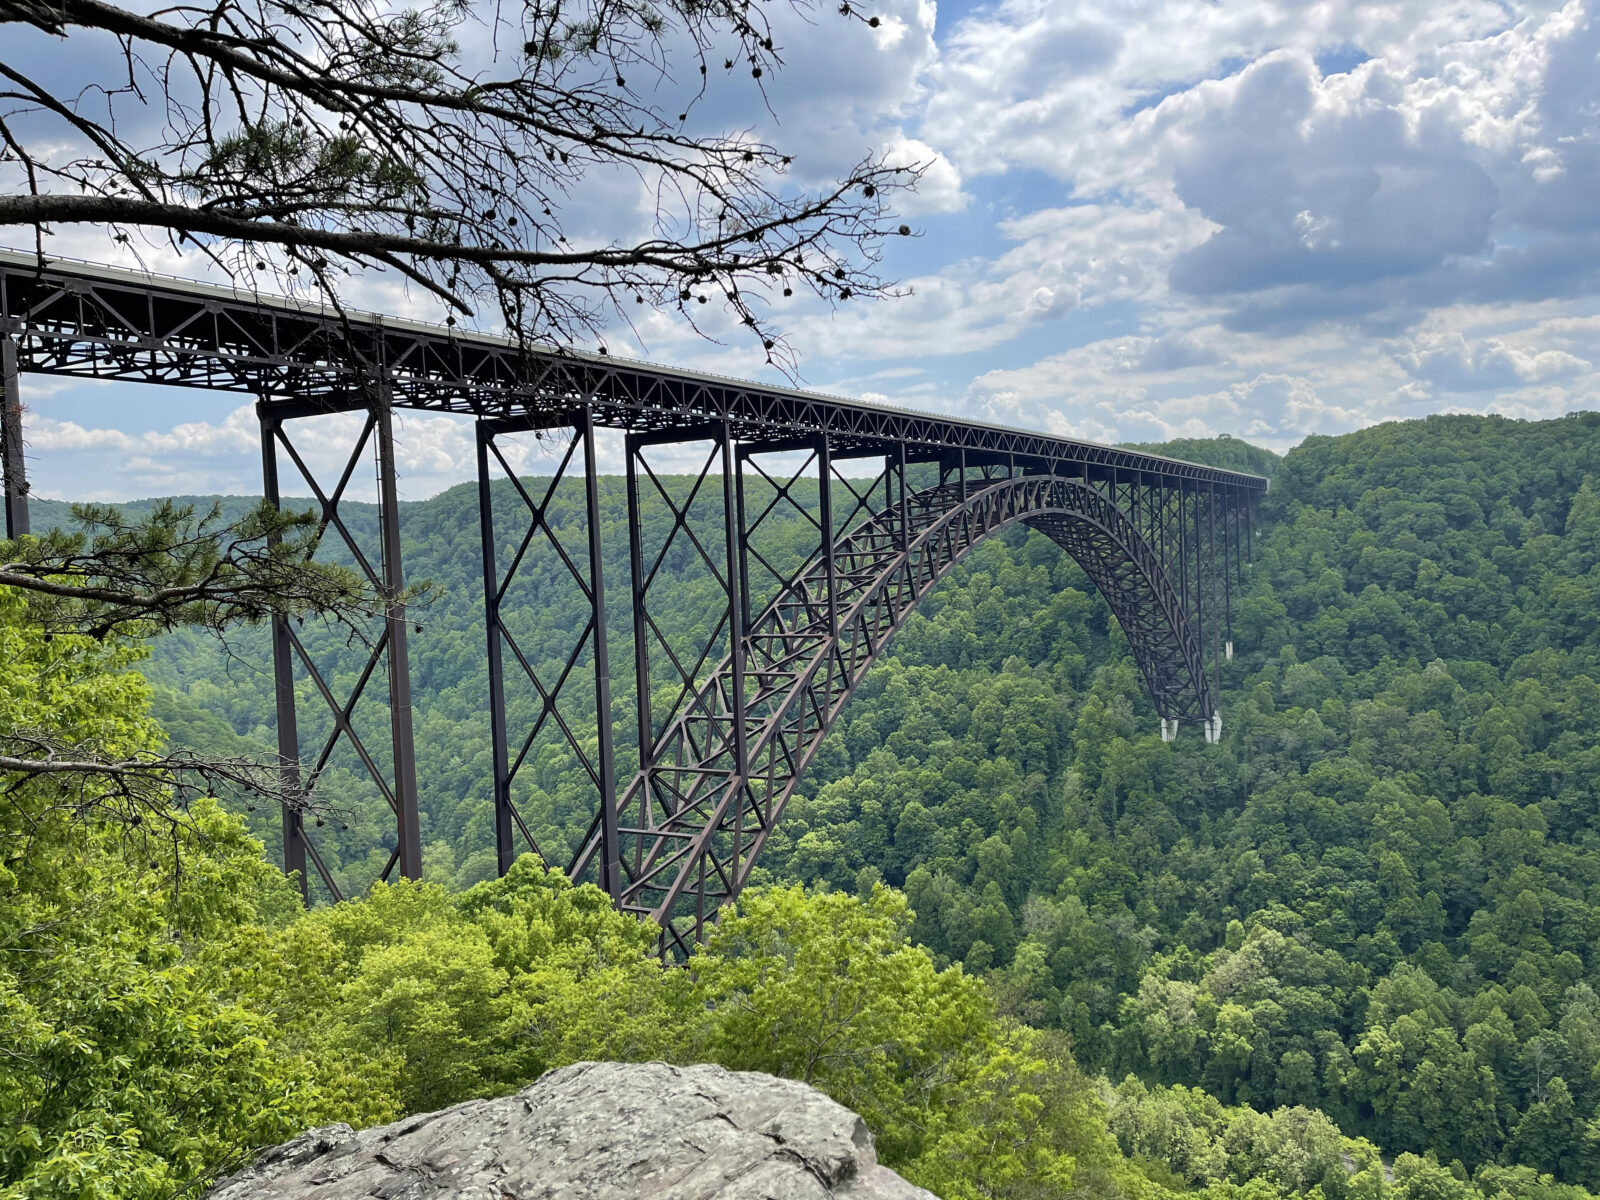 The New River Gorge Bridge, a steel arch bridge near Fayetteville, W.Va., part of the New River Gorge National Park, in the Appalachian Mountains. (Photograph by Lindsay Plaskett)